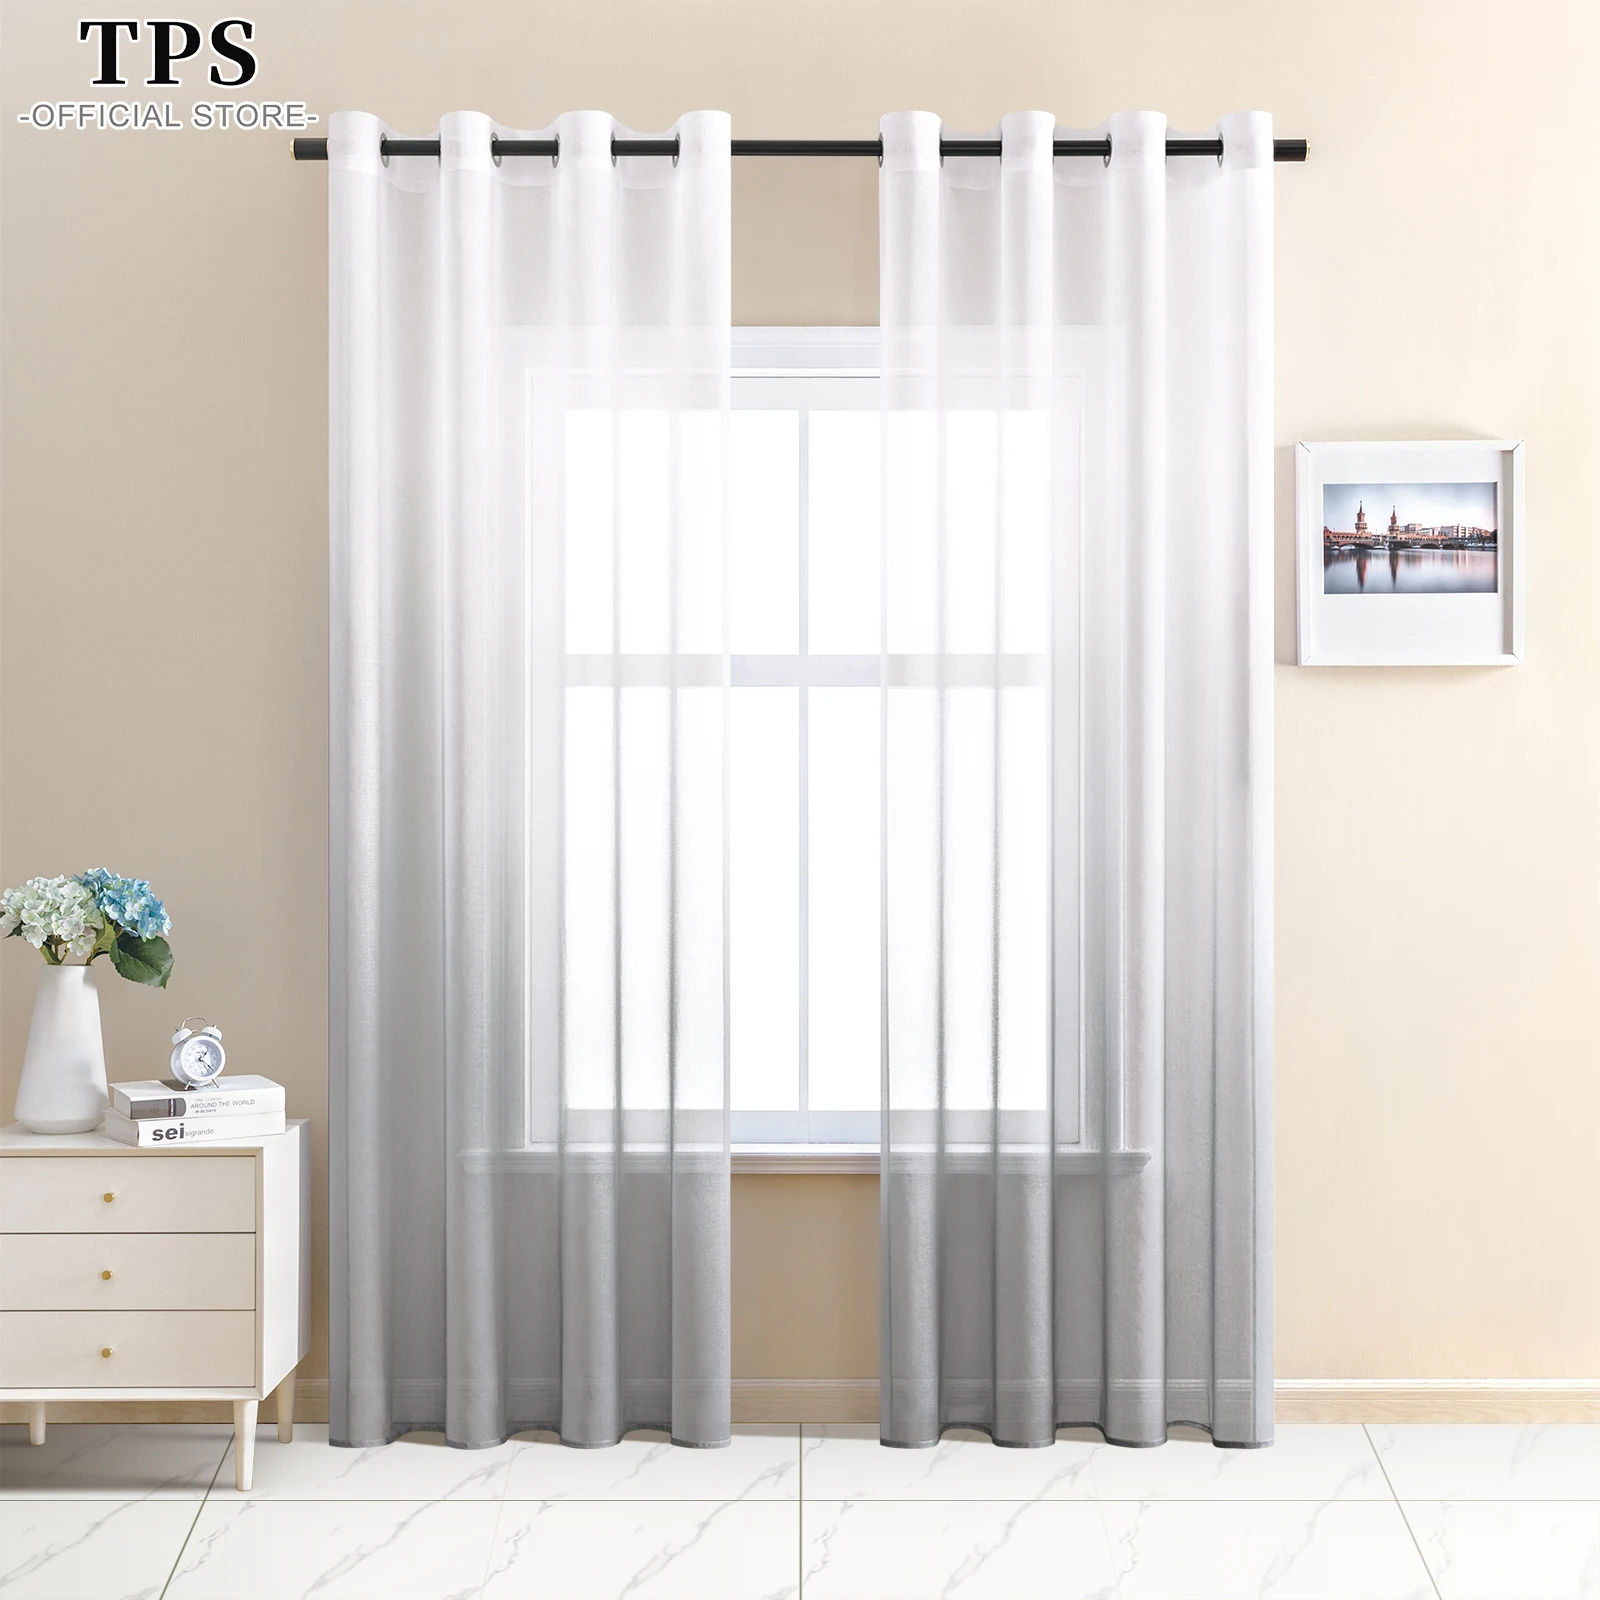 TPS Gradient Color Sheer Curtains for Living Room Bedroom Tulle Curtains for the Kitchen Room Decor Window Treatment Door Drapes 